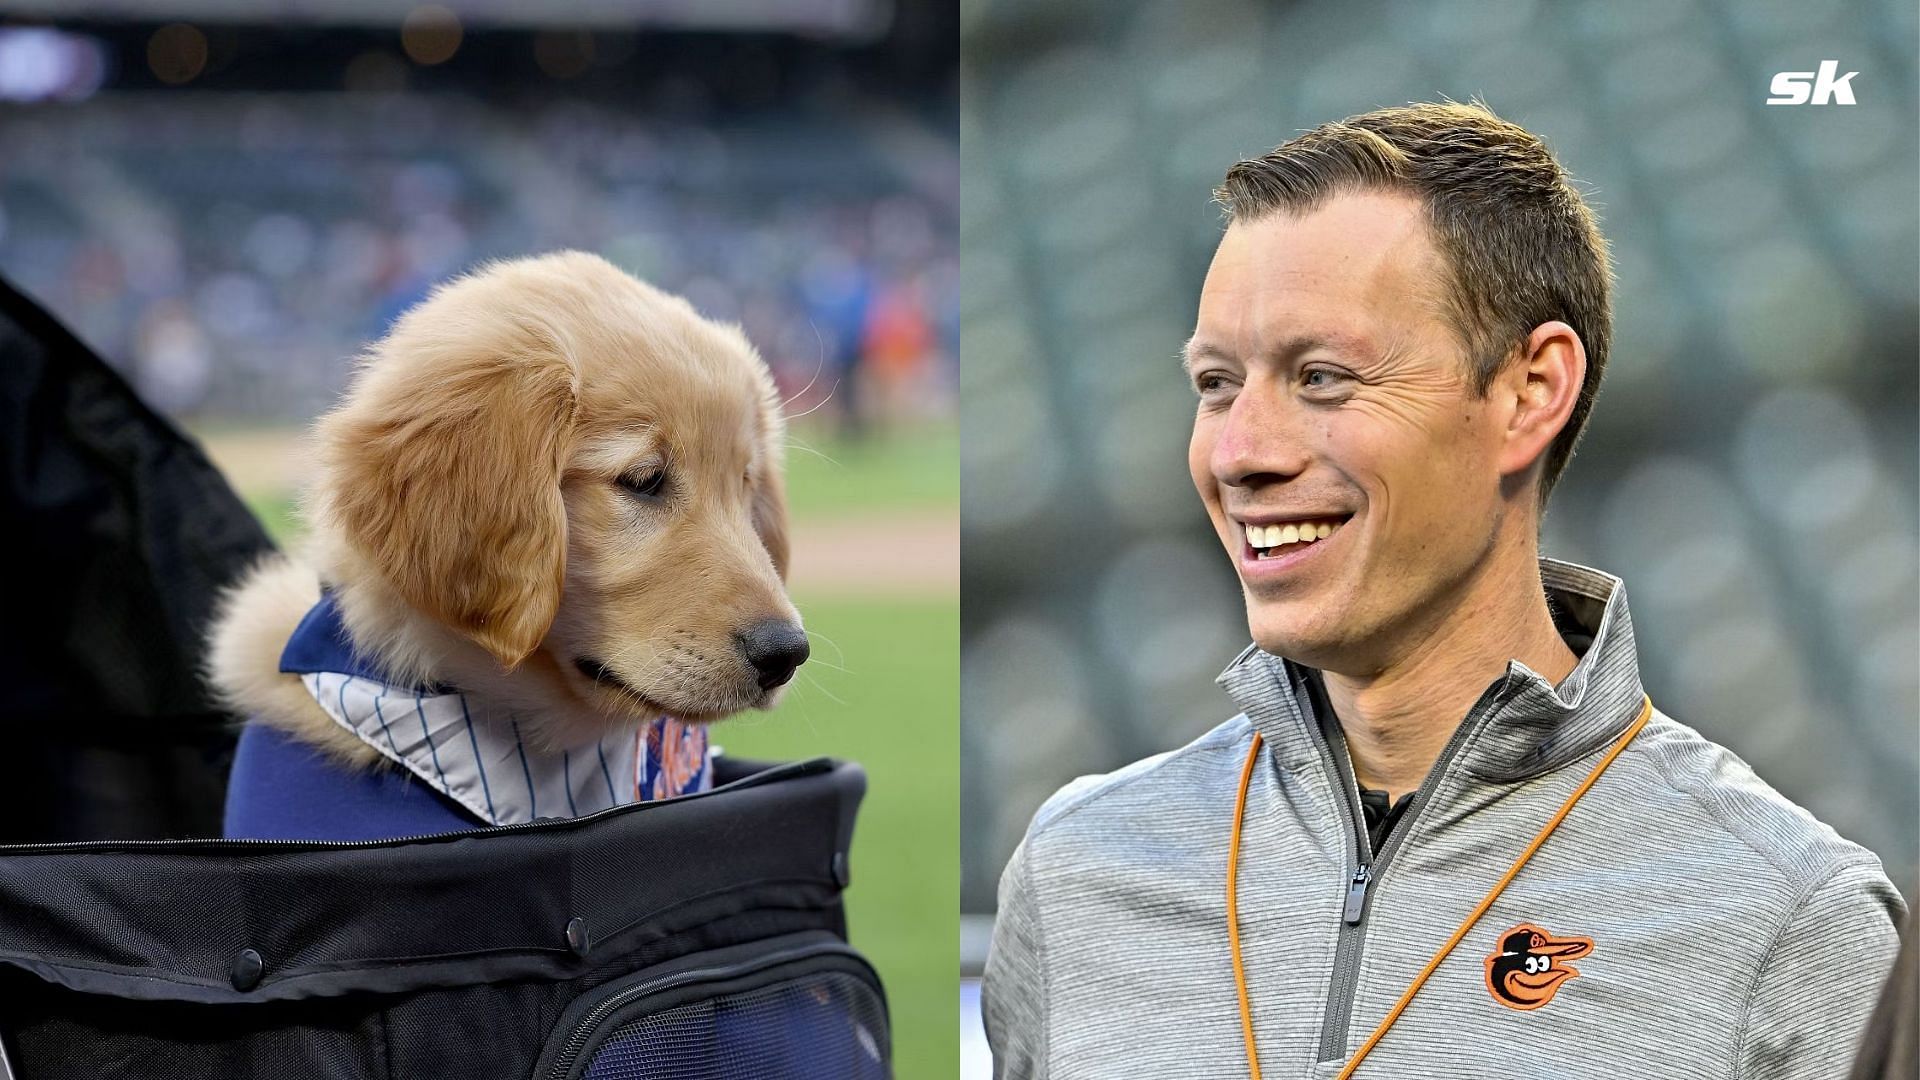 Baltimore Orioles Announcer Kevin Brown - Bark at the Park